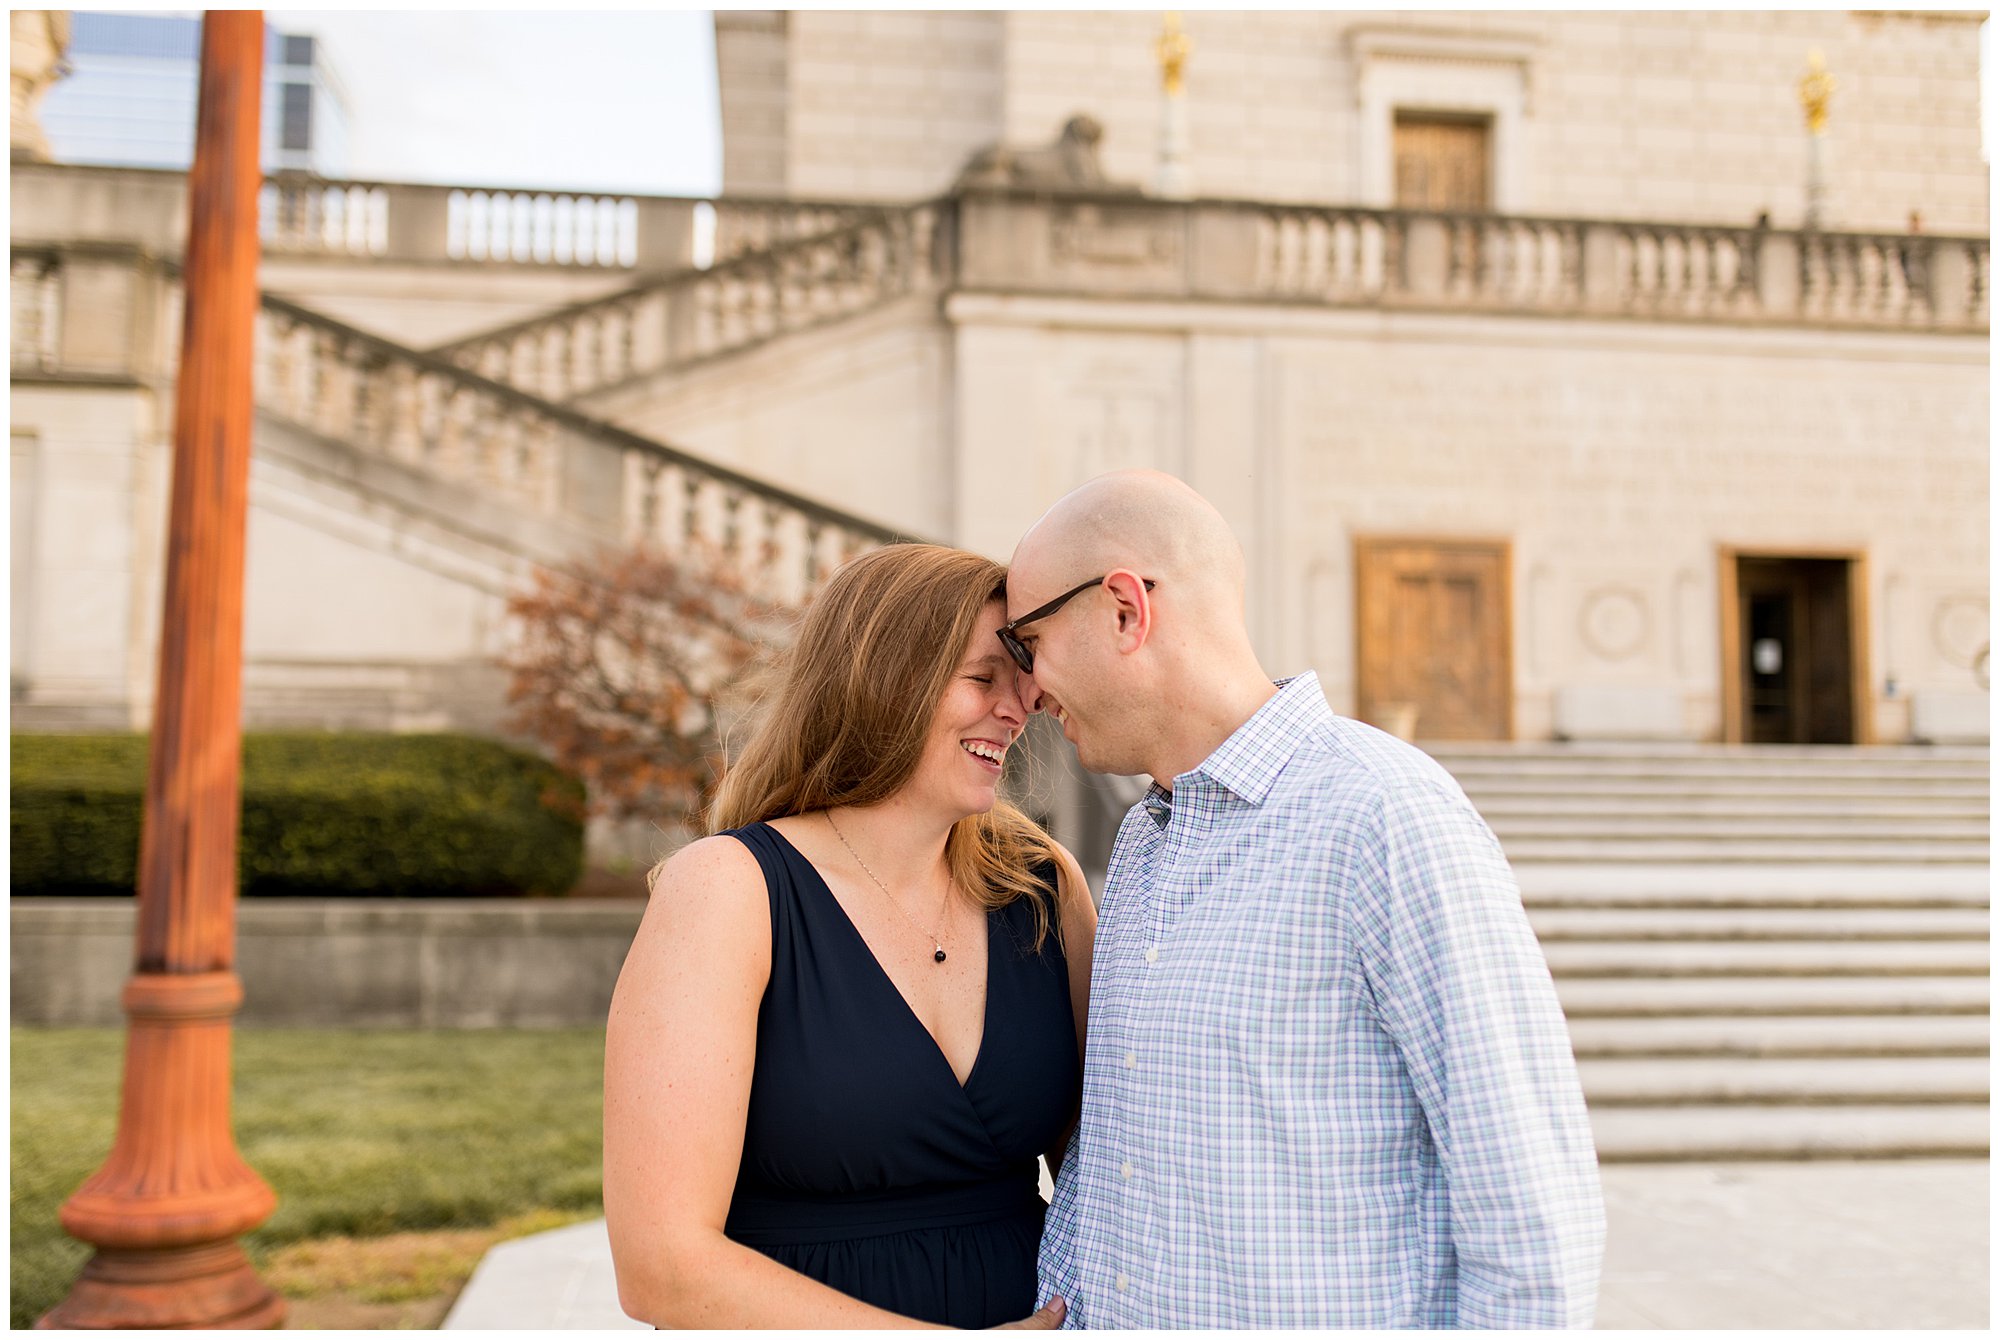 engagement session at Indiana War Memorial in Indianapolis